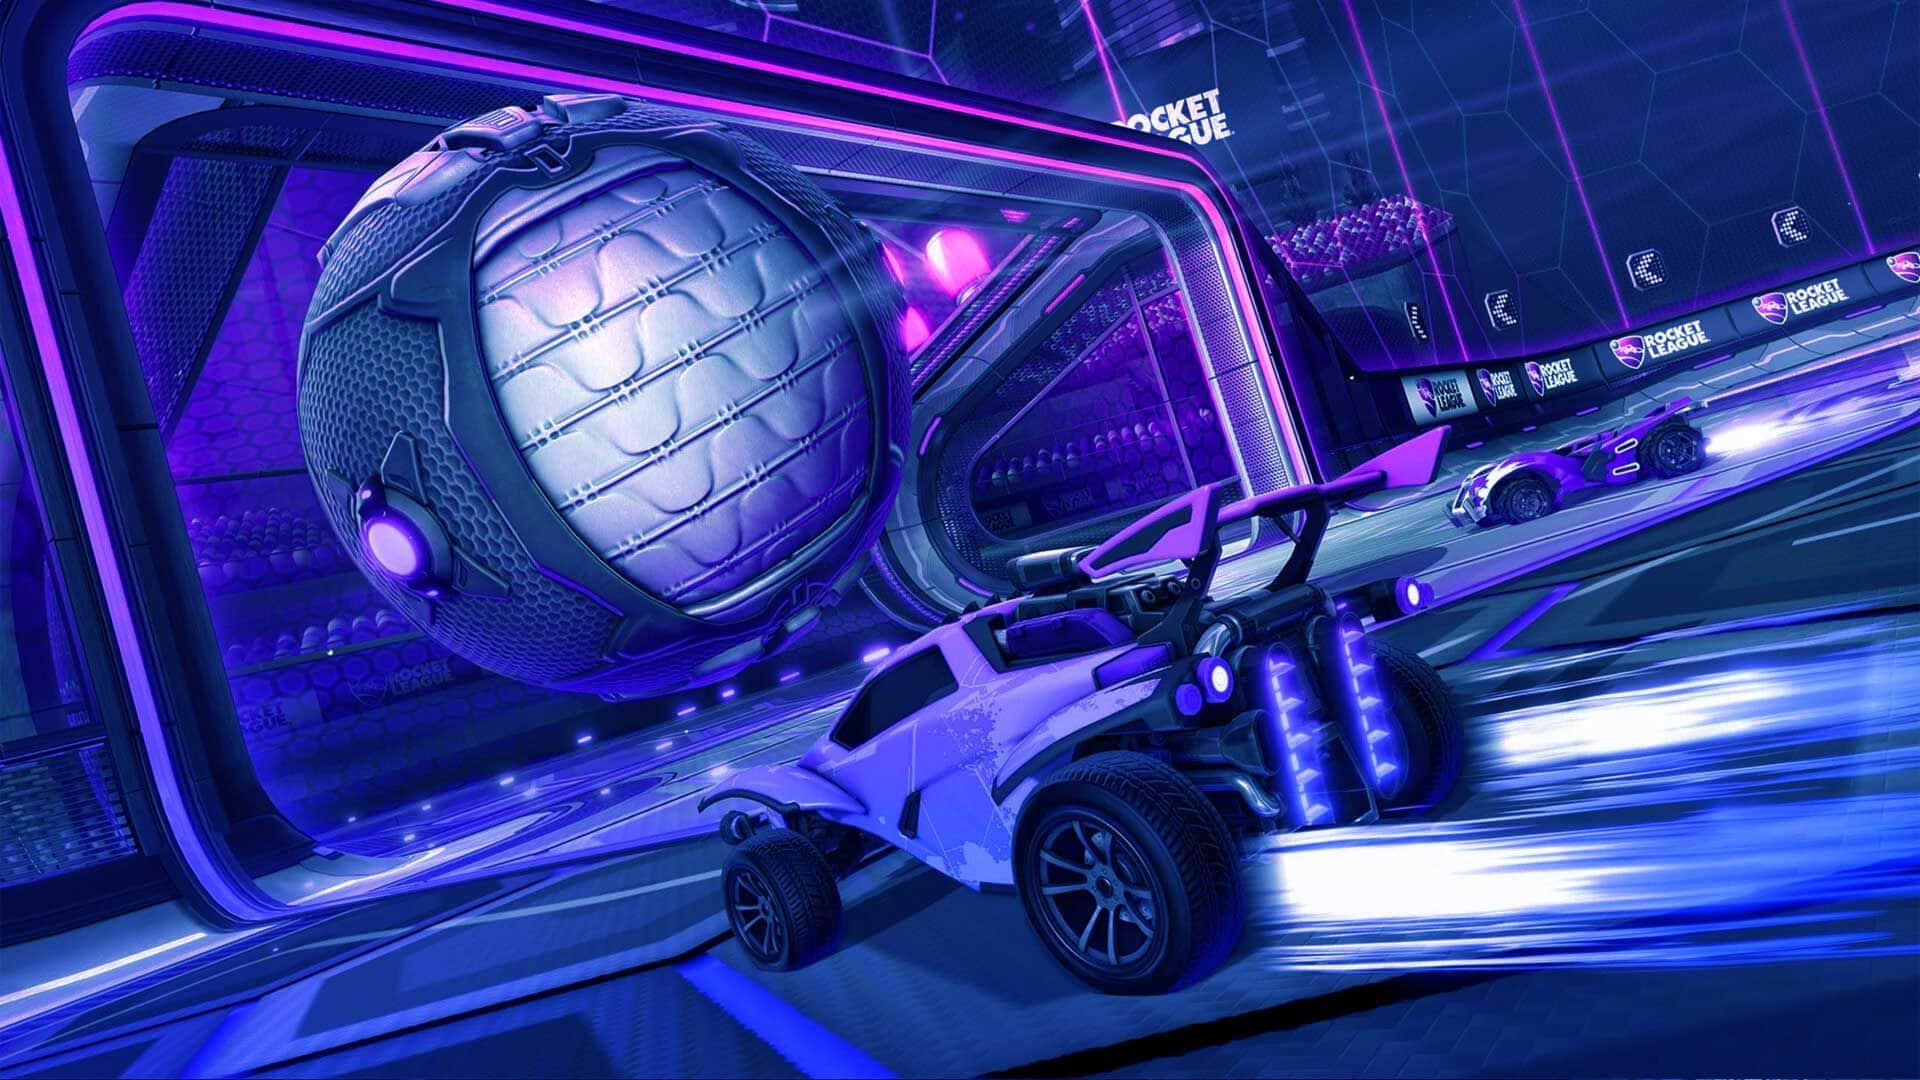 Enjoy an epic gaming experience with HD Rocket League